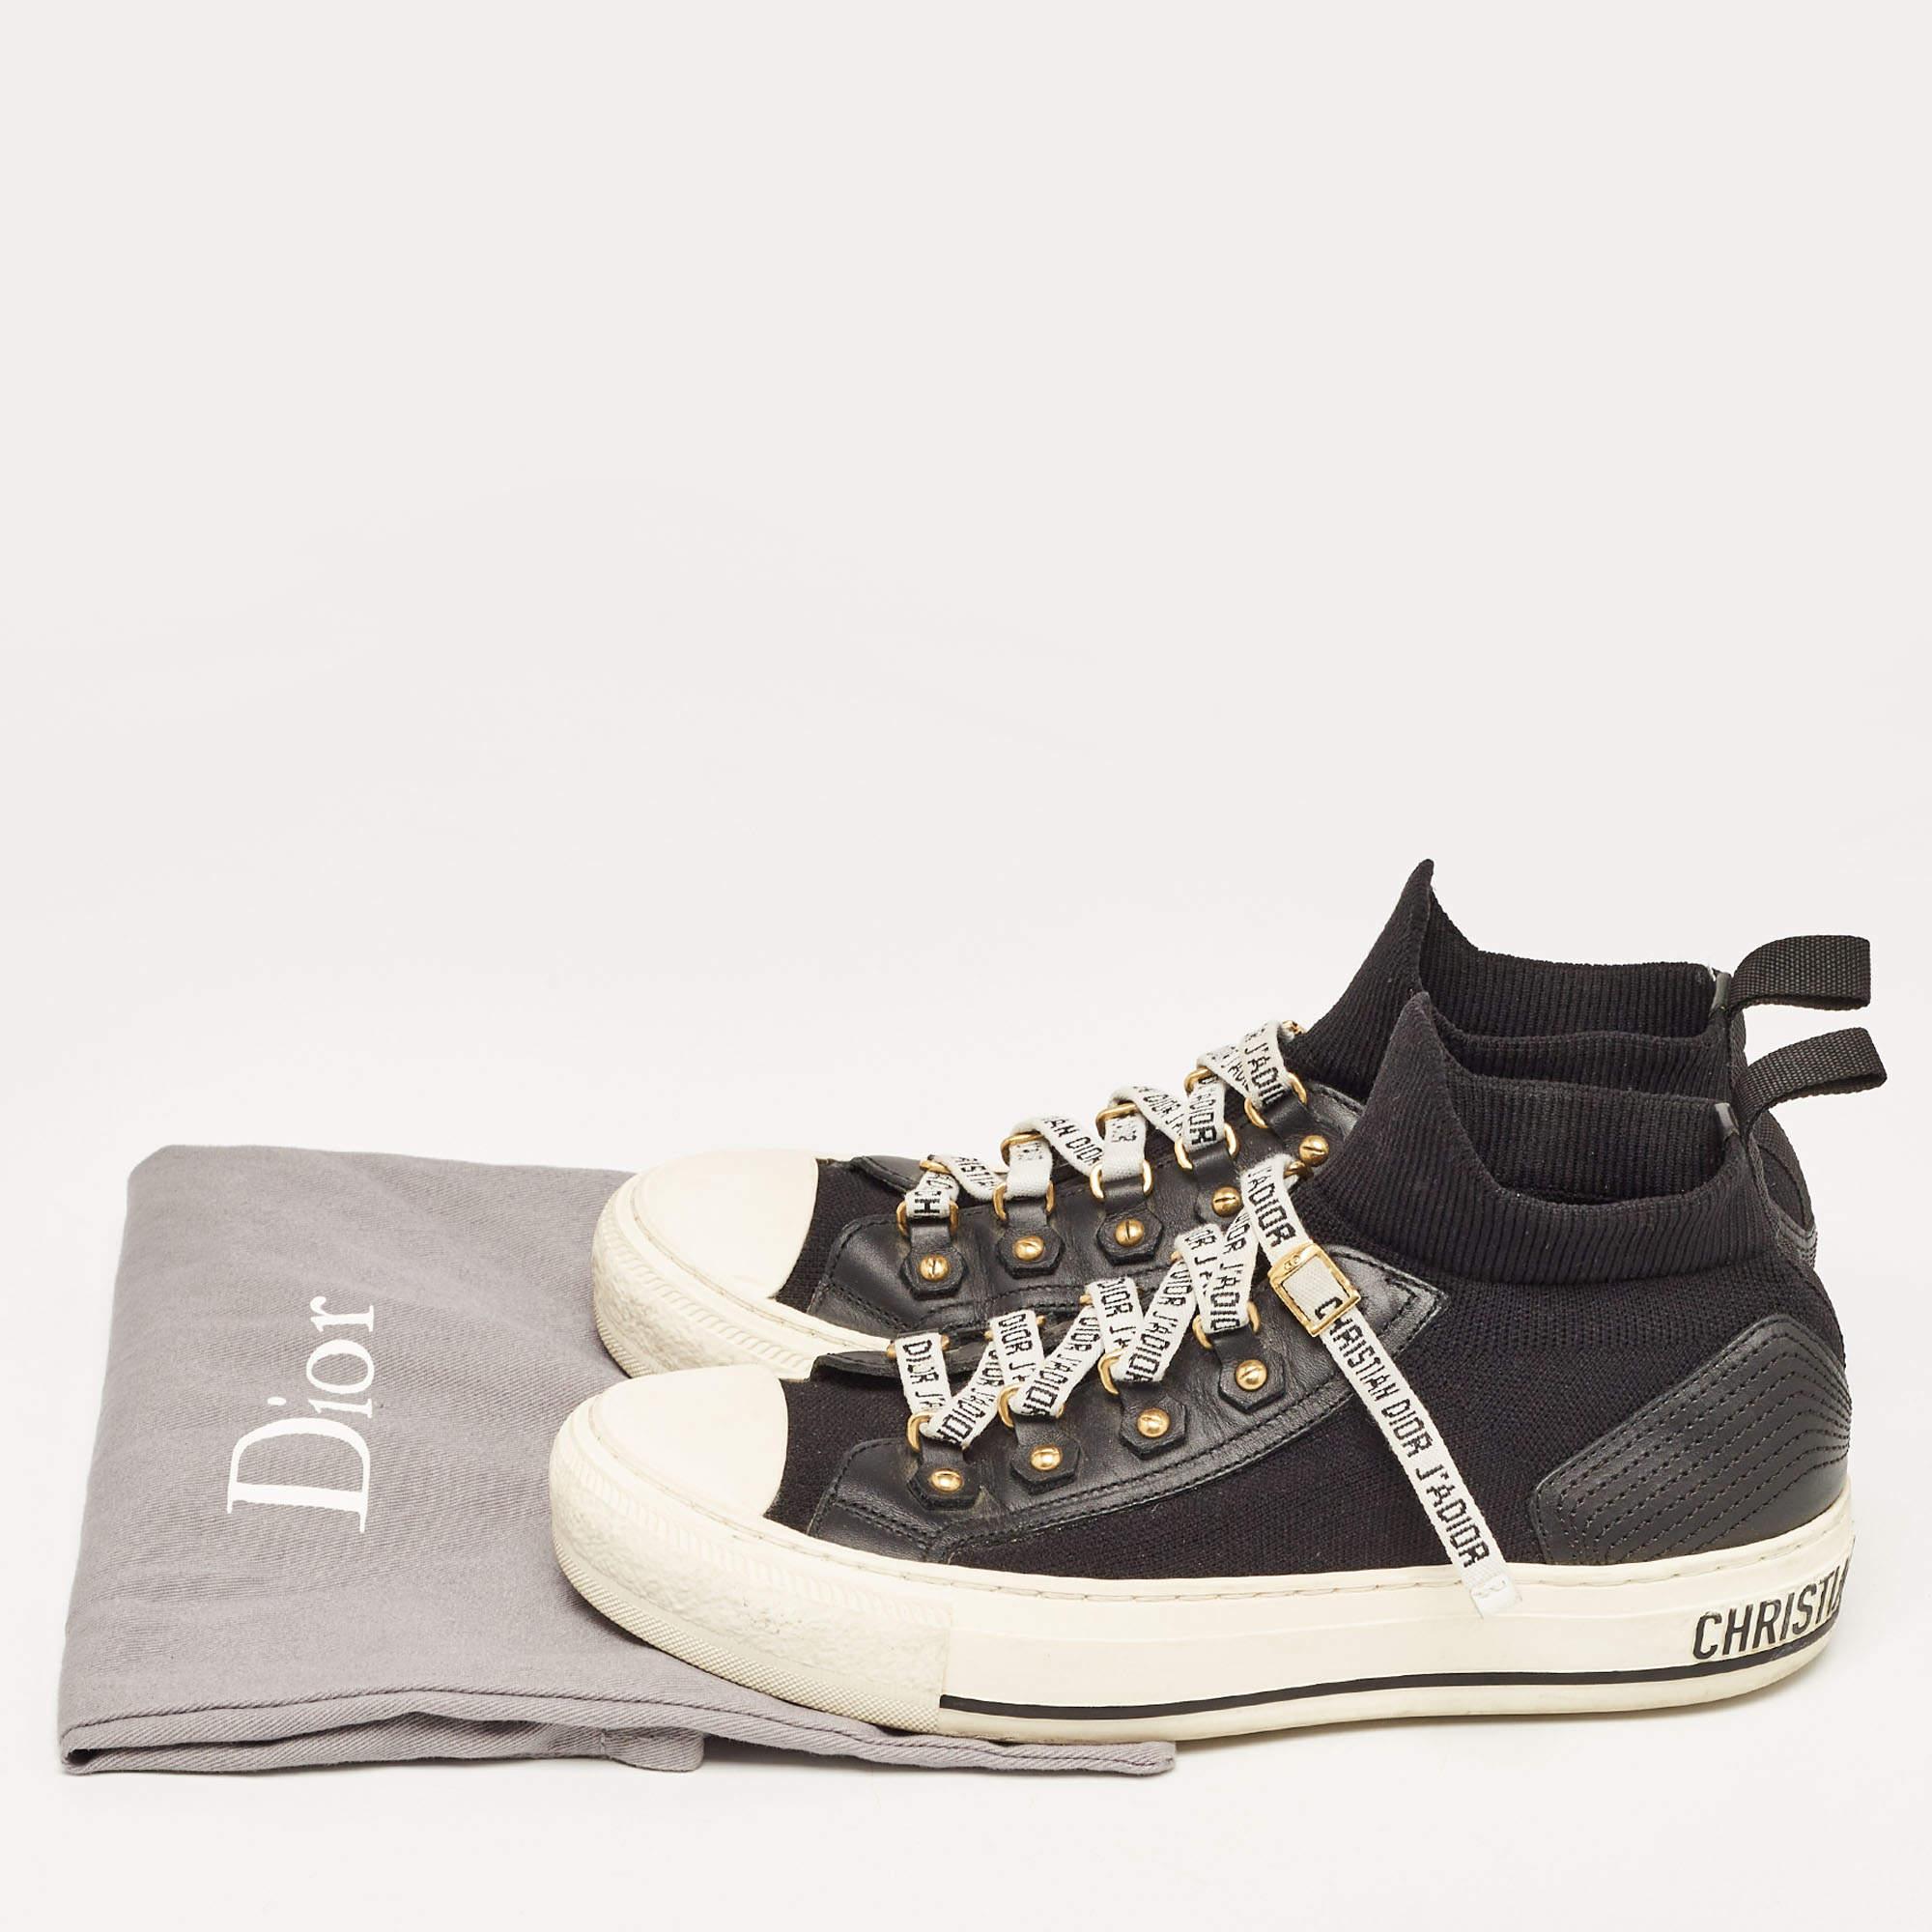 Dior Black Fabric and Leather Walk'n'Dior High Top Sneakers Size 36 en vente 5